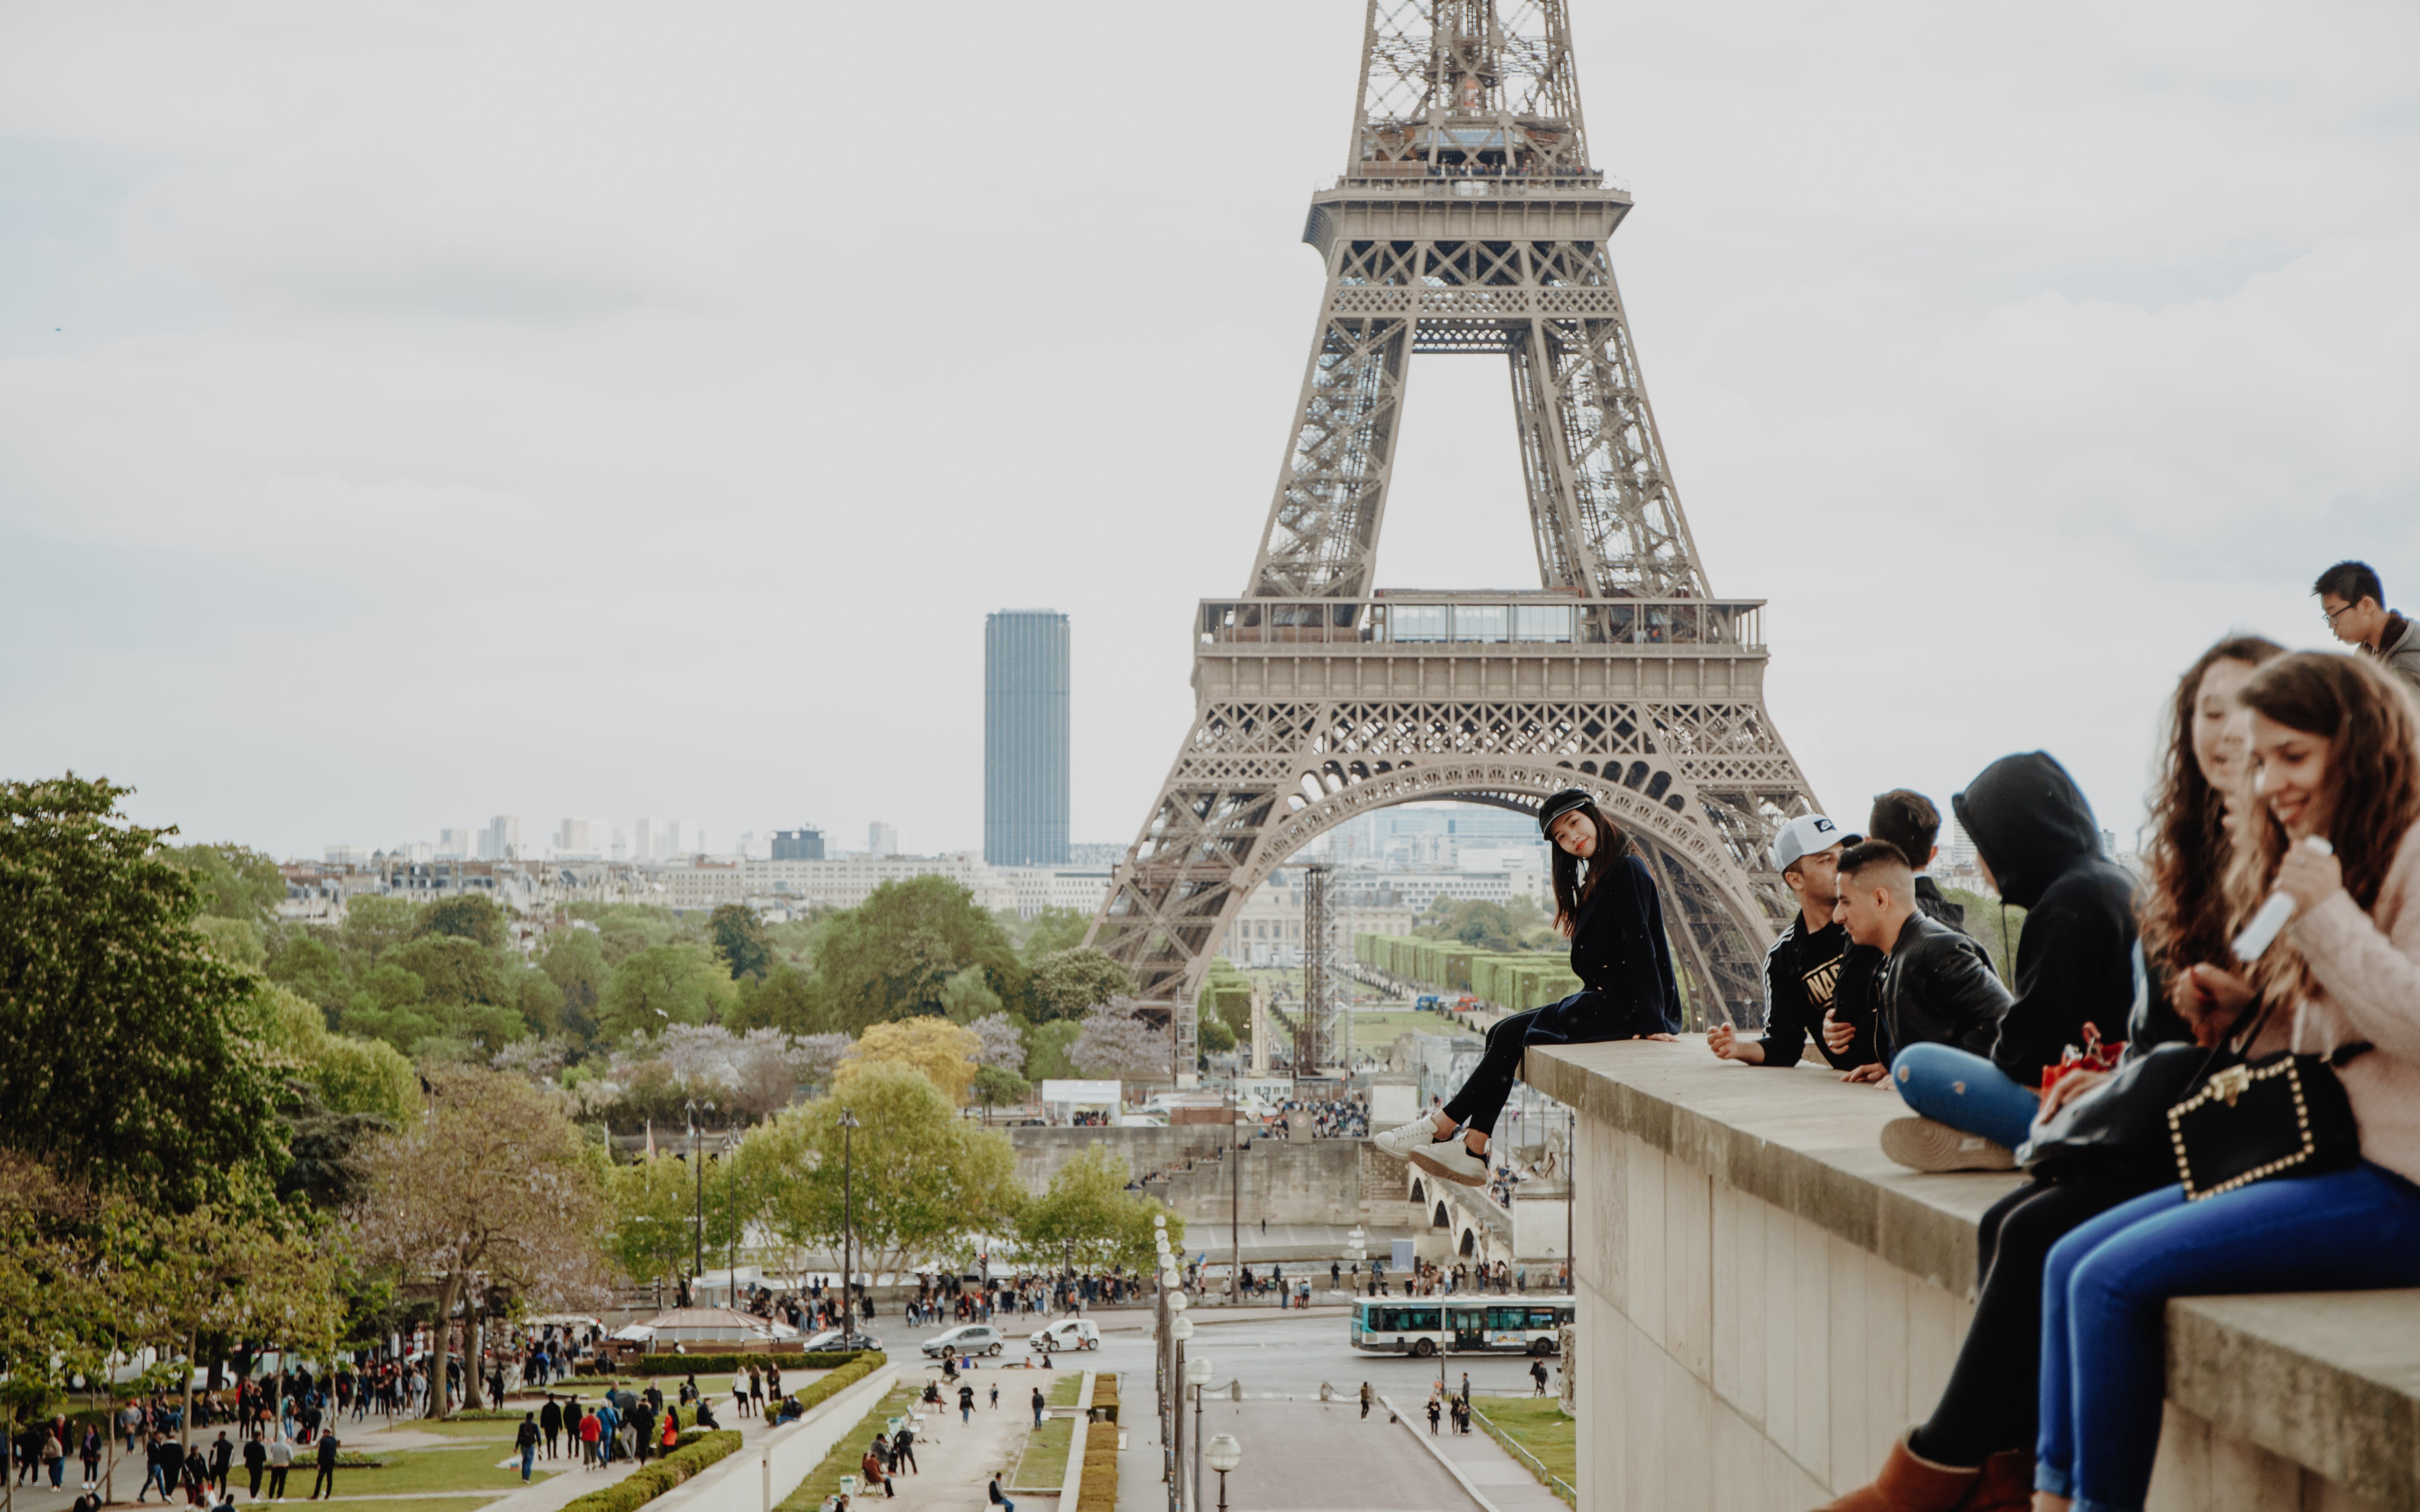 Image of lady in front of the Eiffel Tower in Paris.